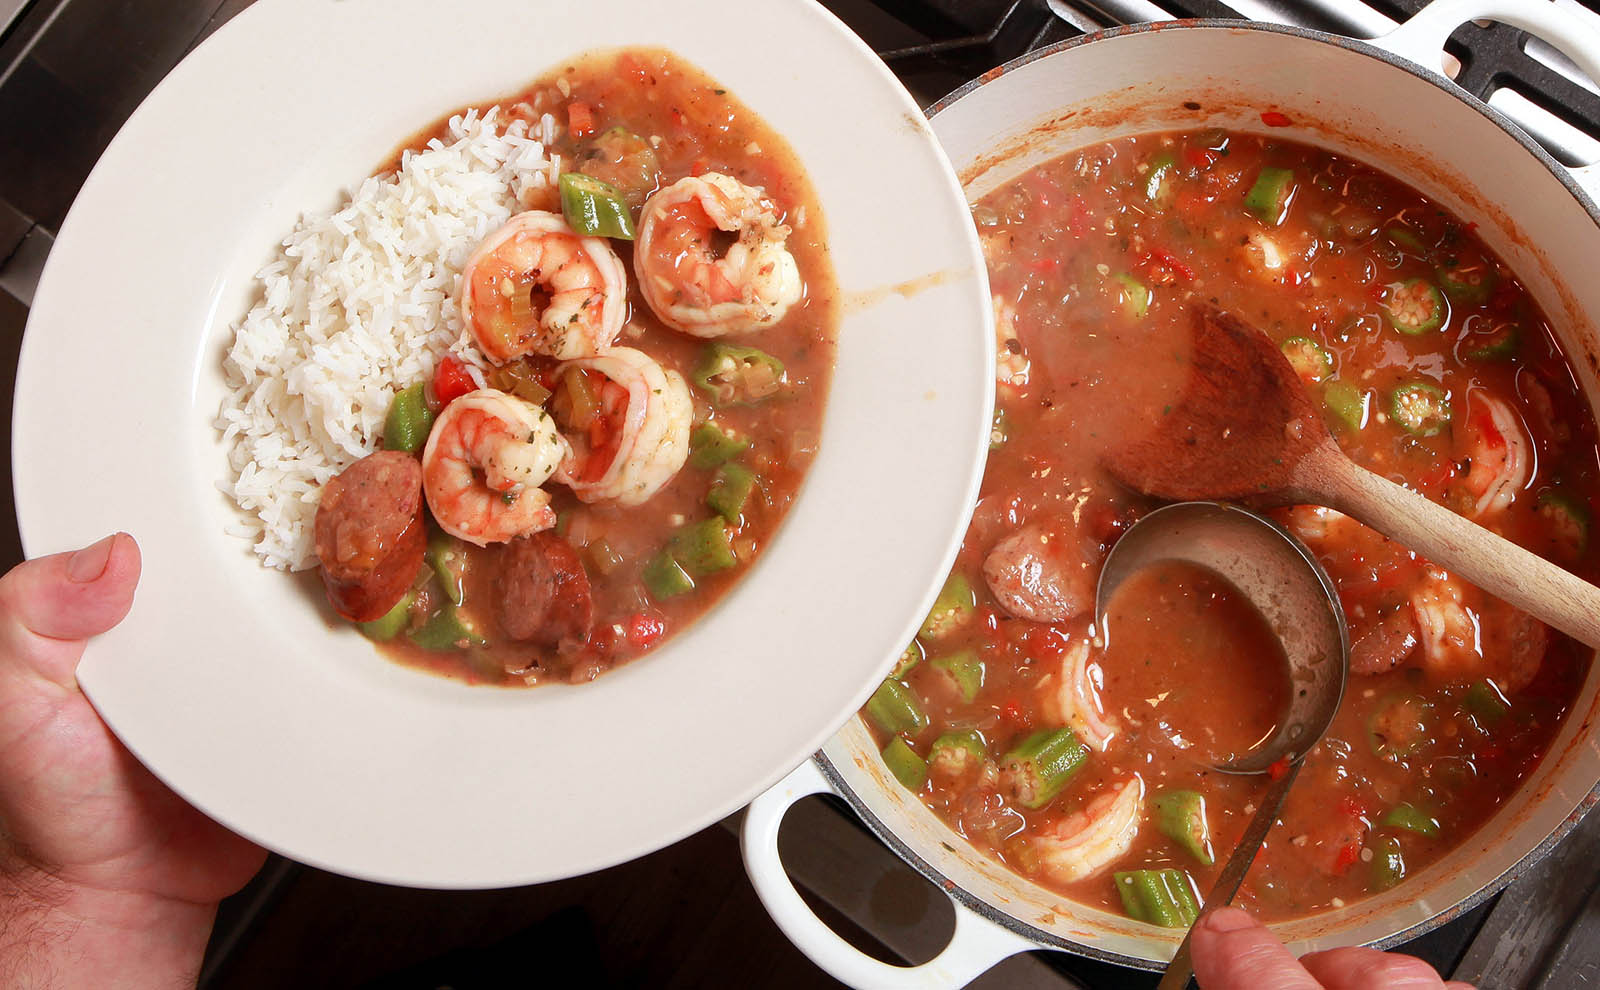 Half the Population Can’t Pass This Random Trivia Quiz, And I Doubt You Can Either Gumbo